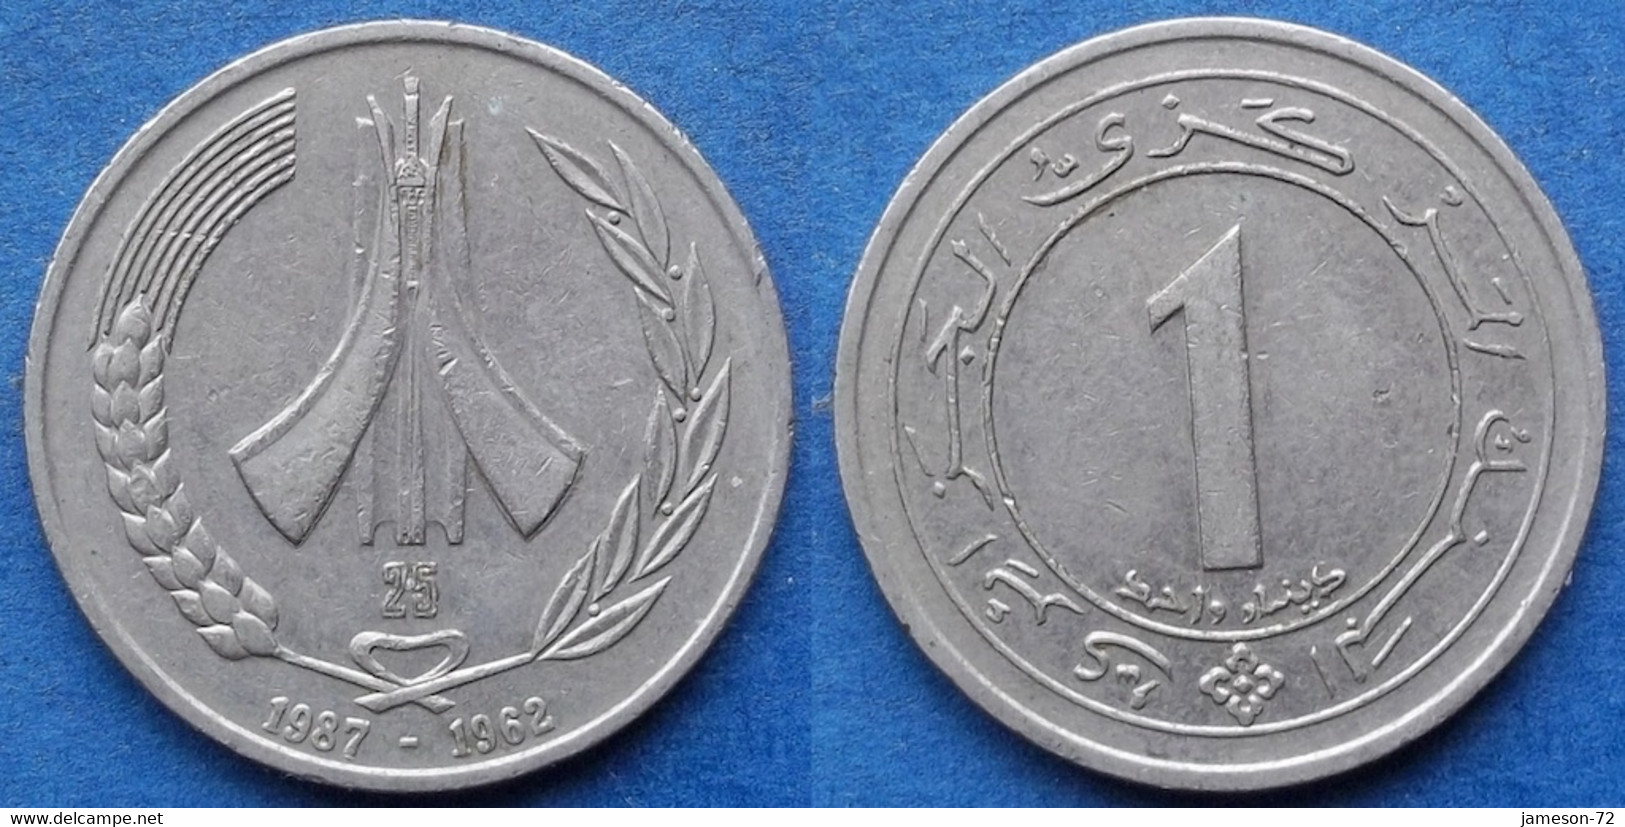 ALGERIA - 1 Dinar 1987 "25th Anniversary Independence" KM# 117 - Edelweiss Coins - Algeria